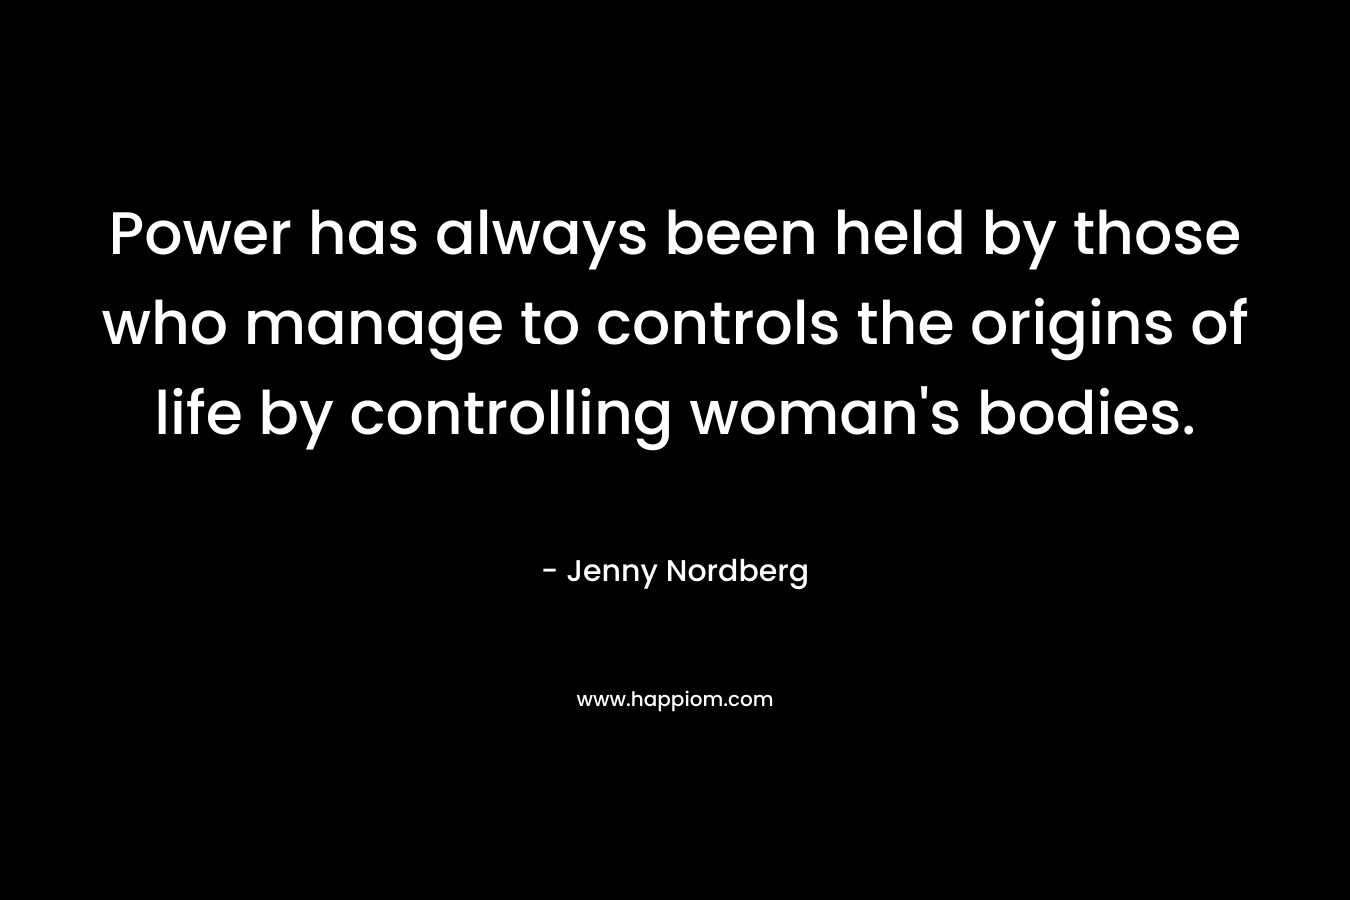 Power has always been held by those who manage to controls the origins of life by controlling woman’s bodies. – Jenny Nordberg